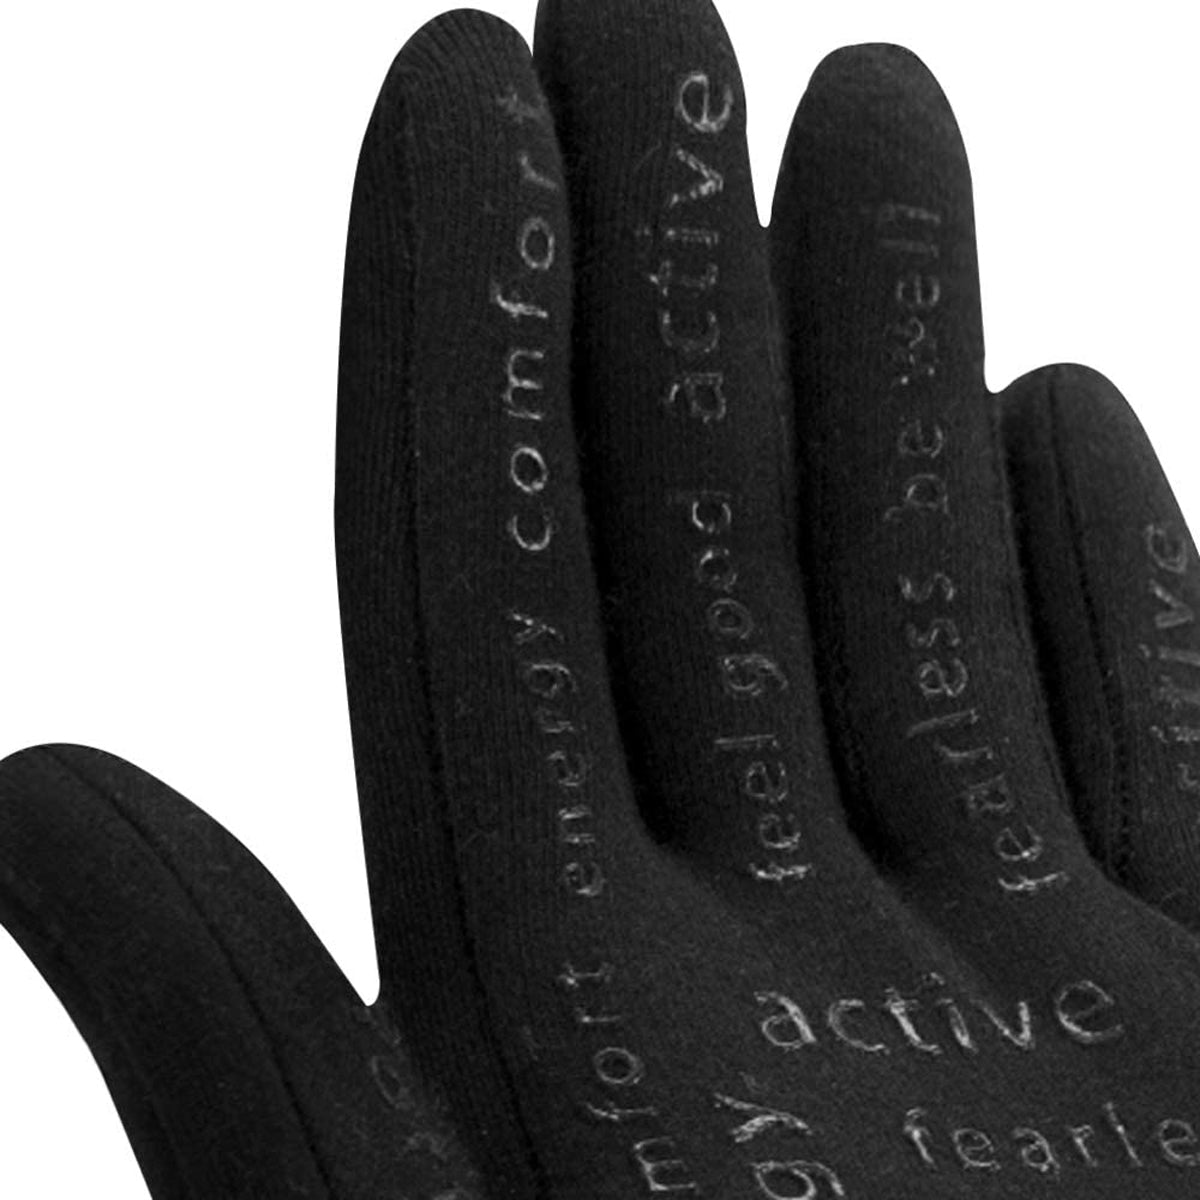 Intellinetix Vibrating Therapy Gloves - Increases circulation and reduces pain Intellinetix